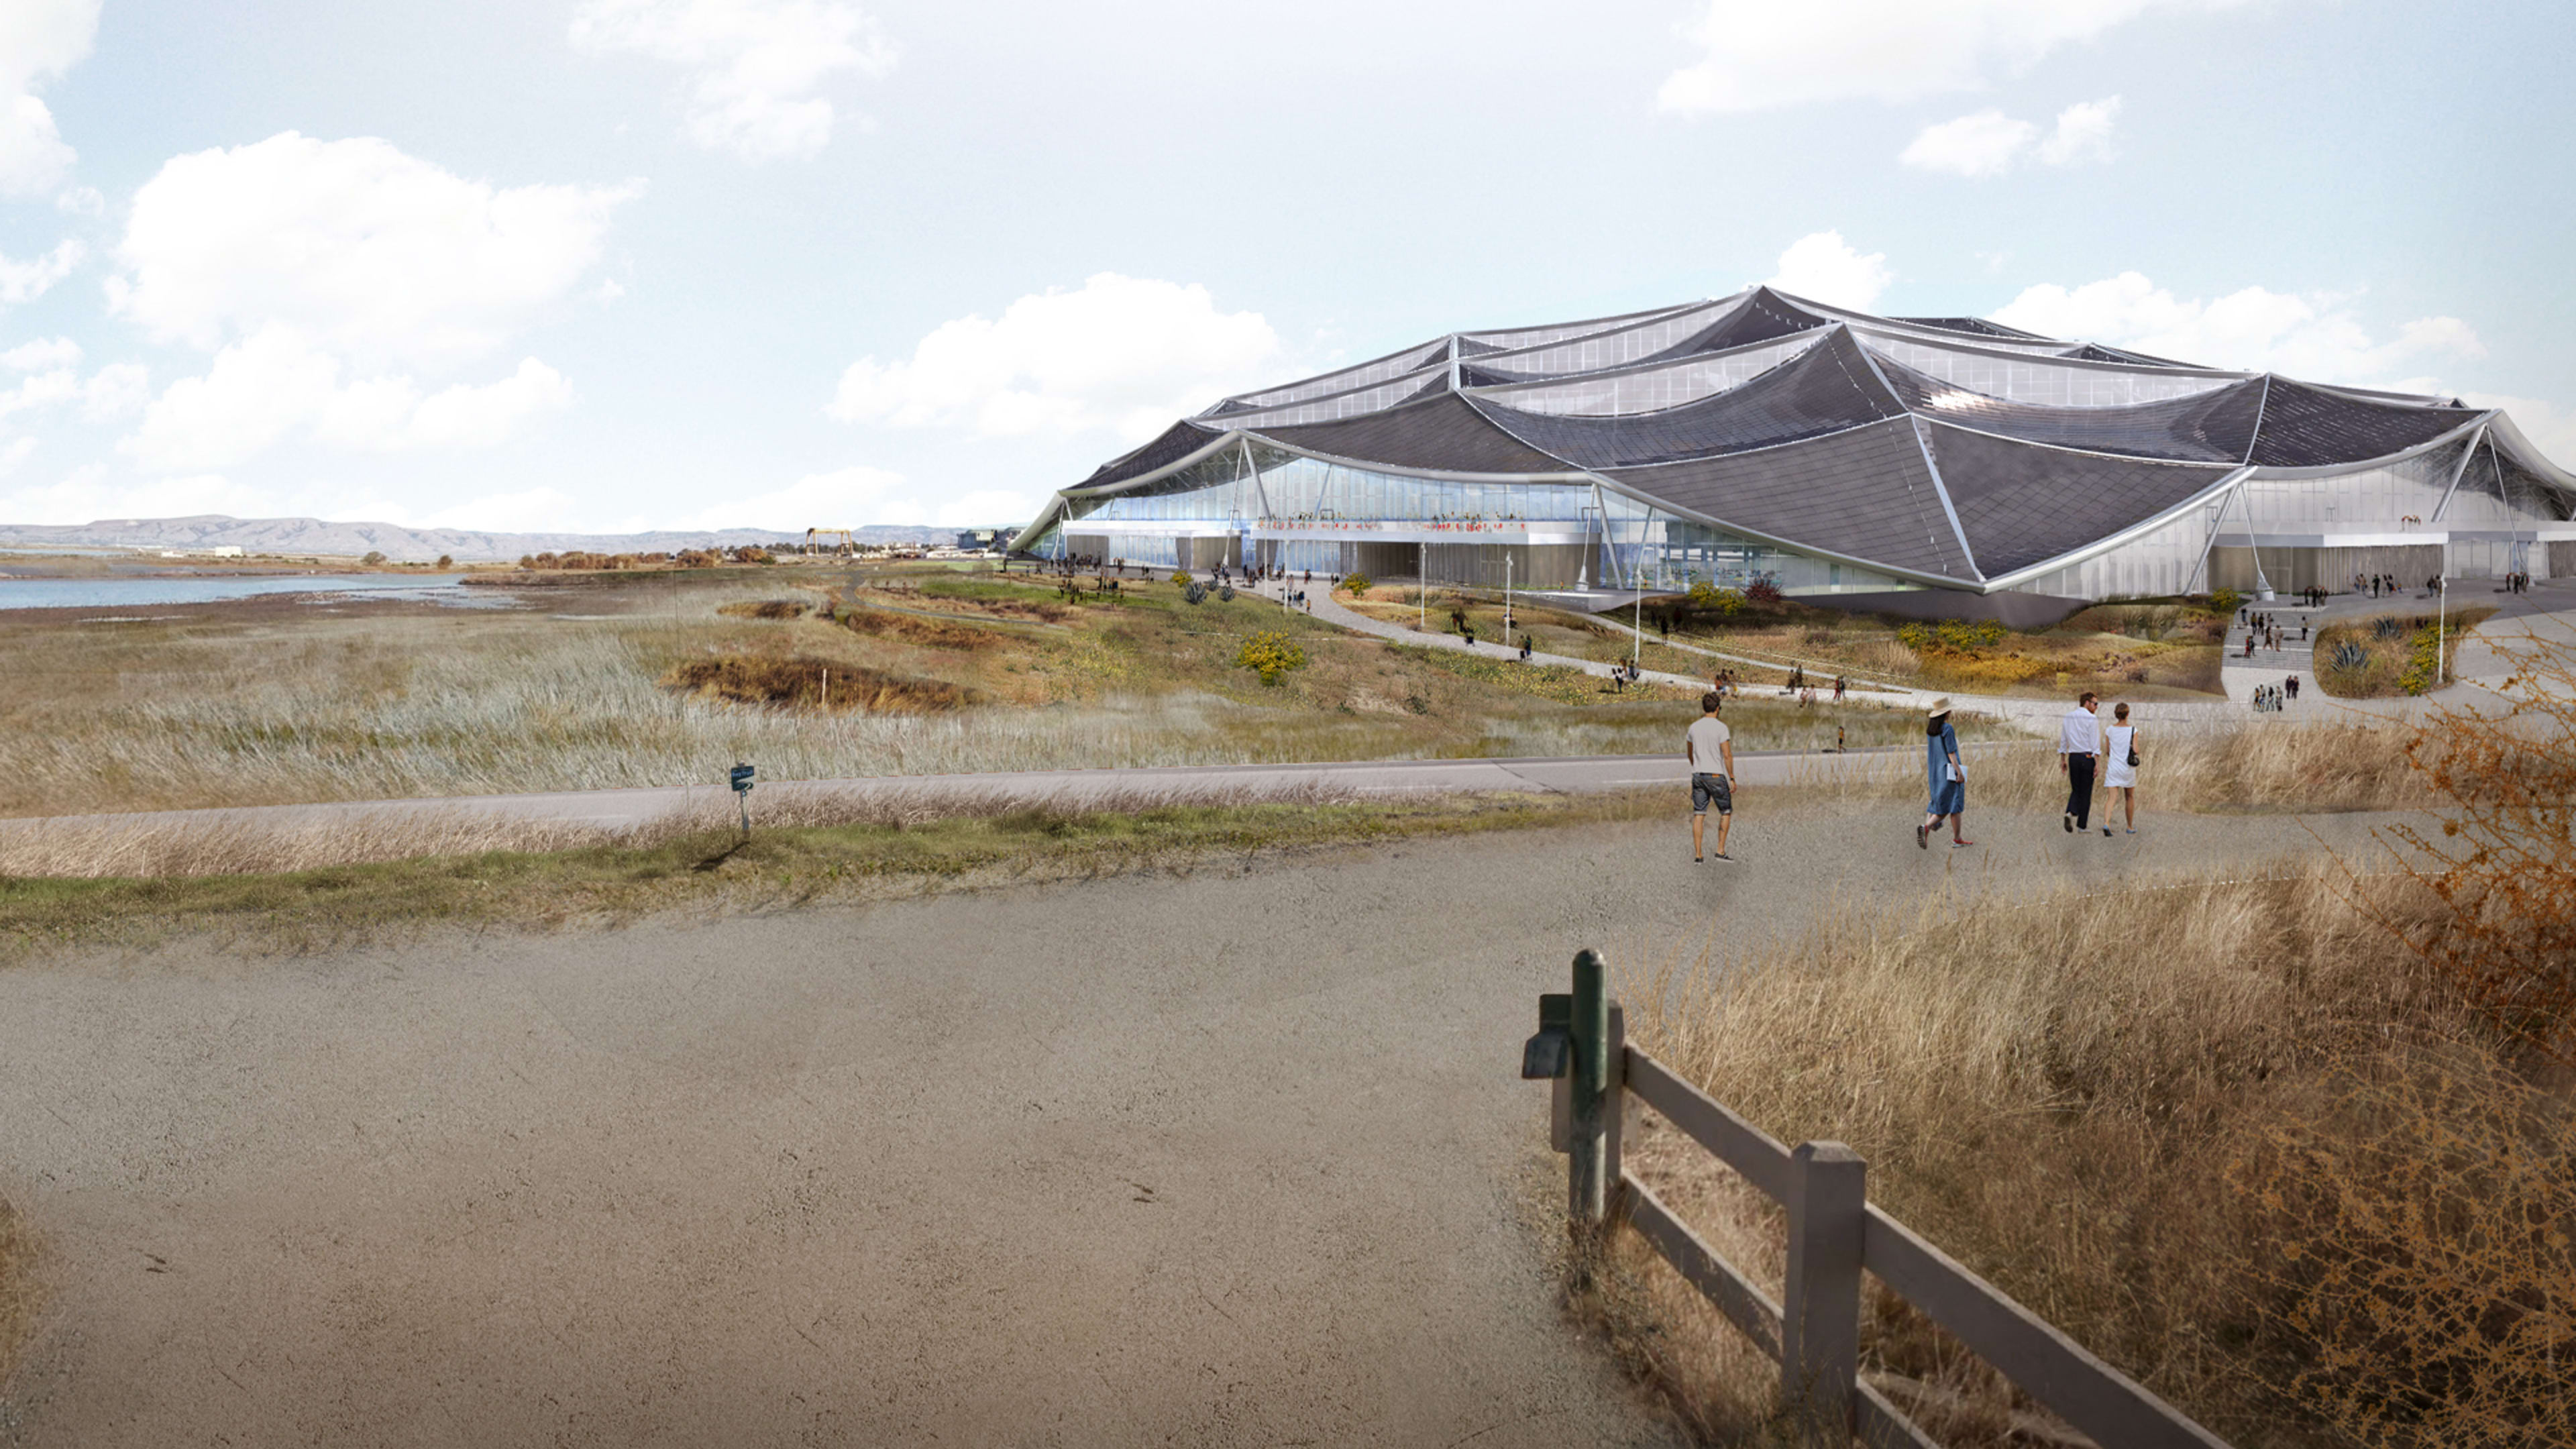 Google’s New Office Will Be Heated And Cooled By The Ground Underneath